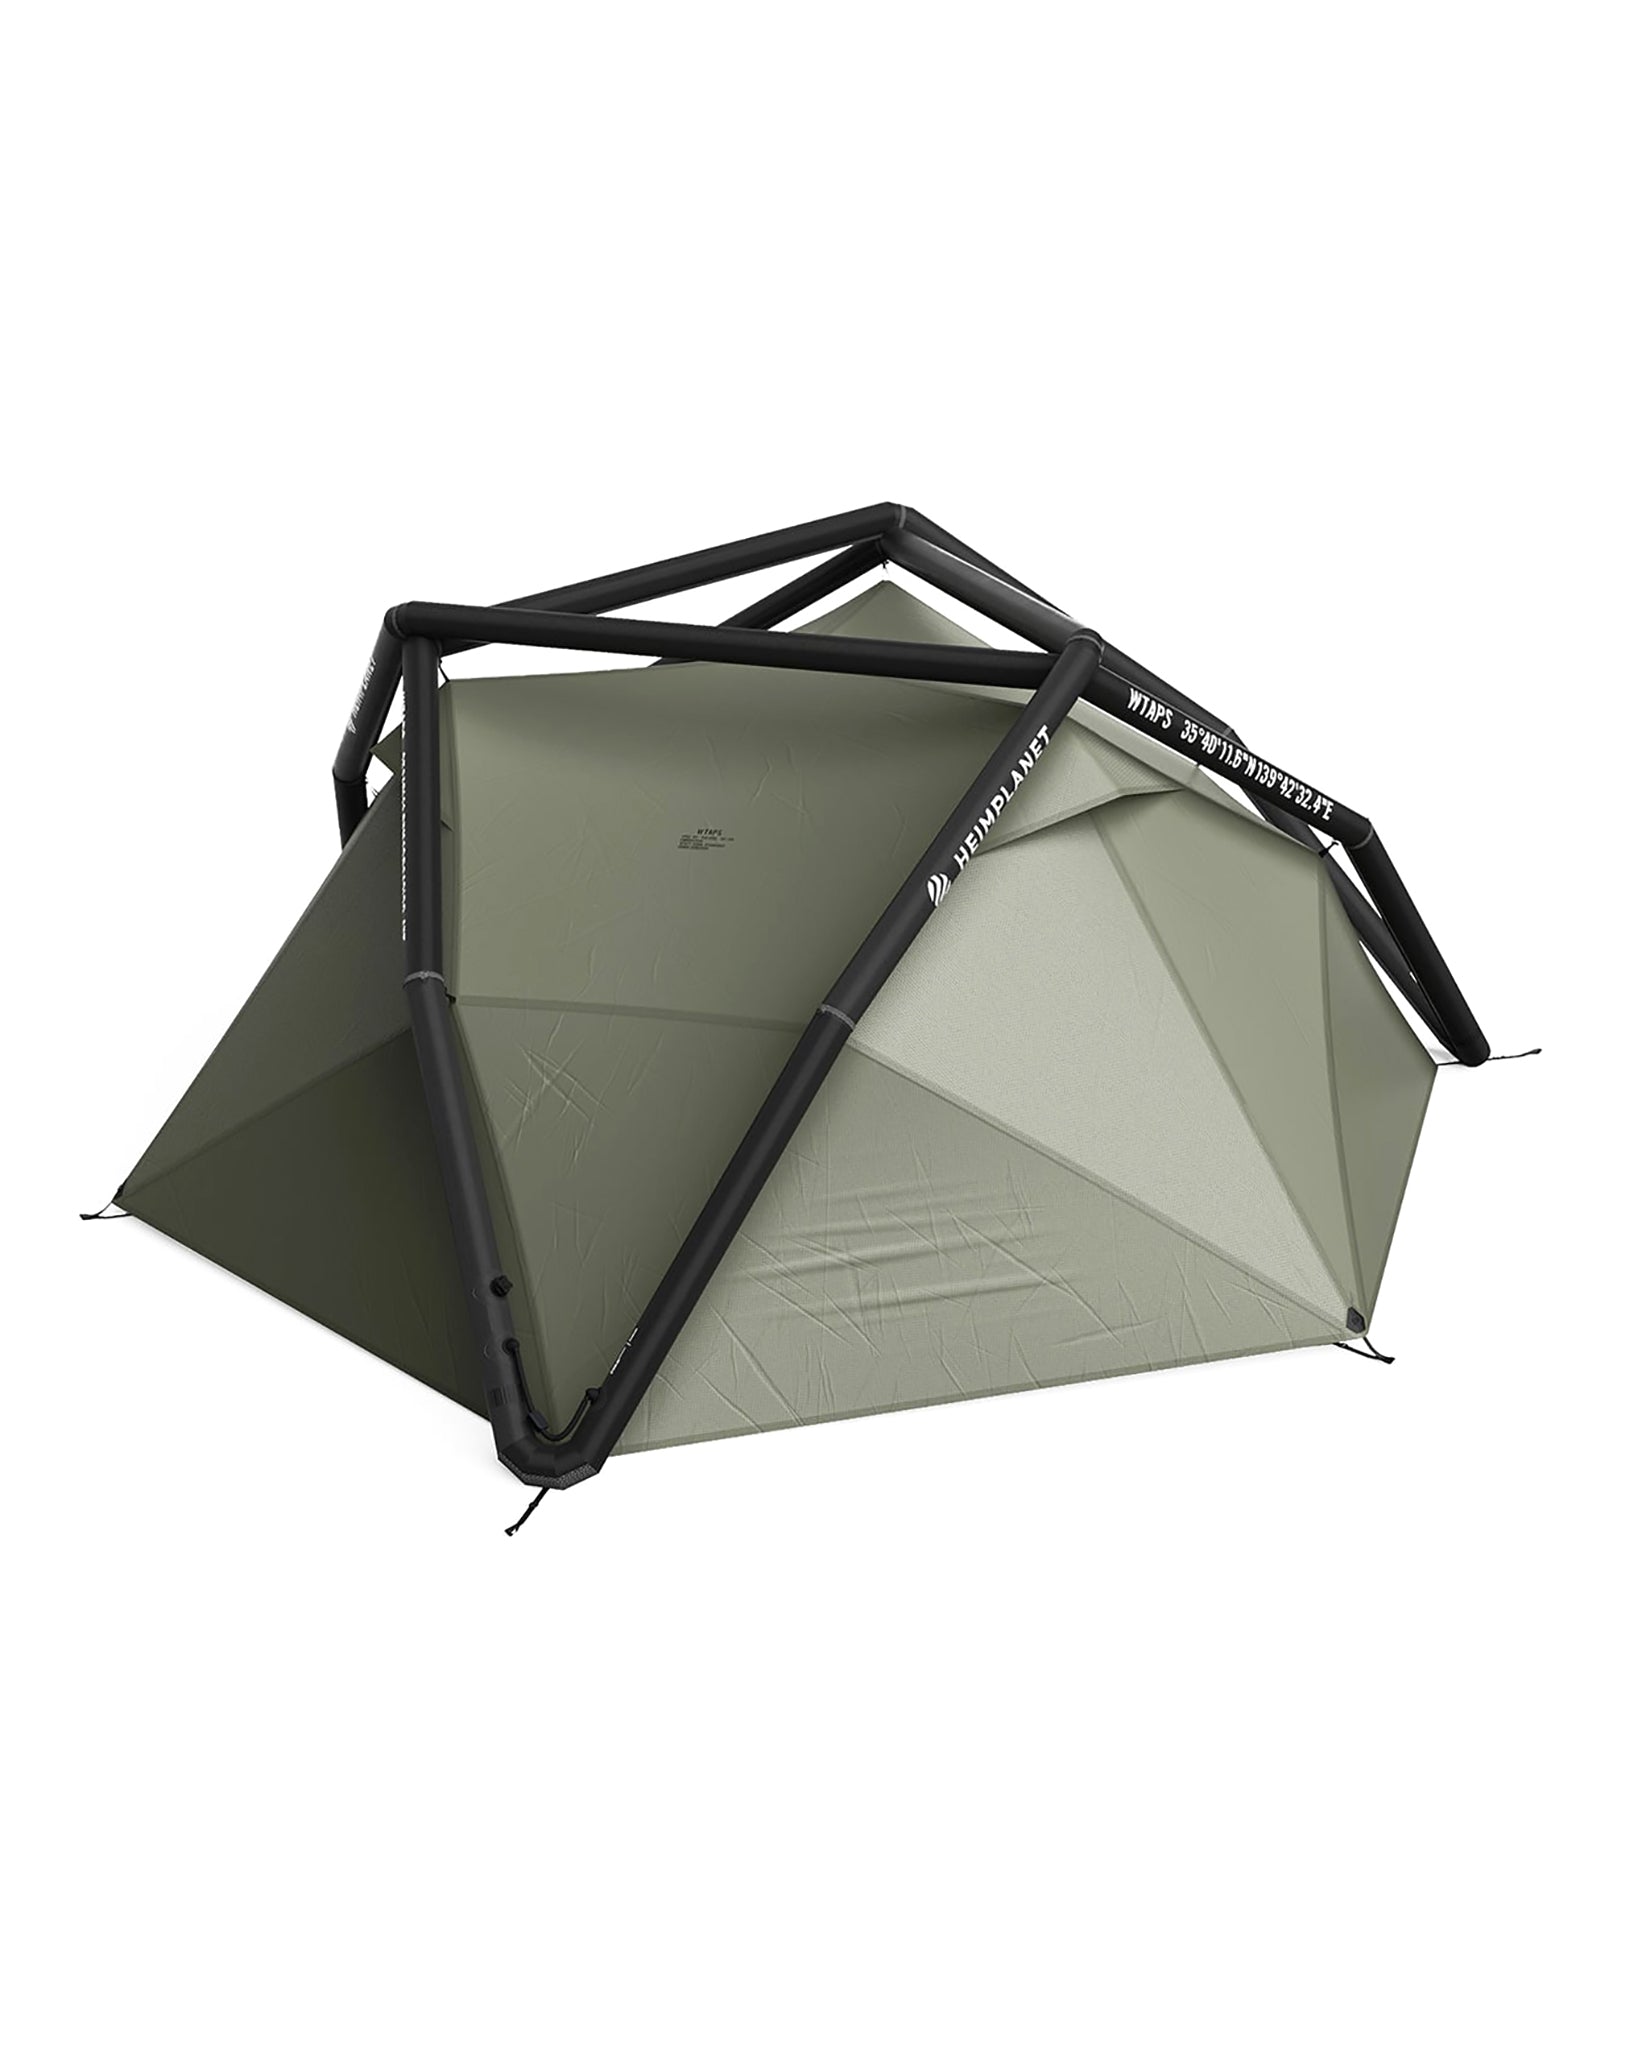 WTAPS Kirra / Tent / Poly. Heimplanet Olive Drab | HAVEN